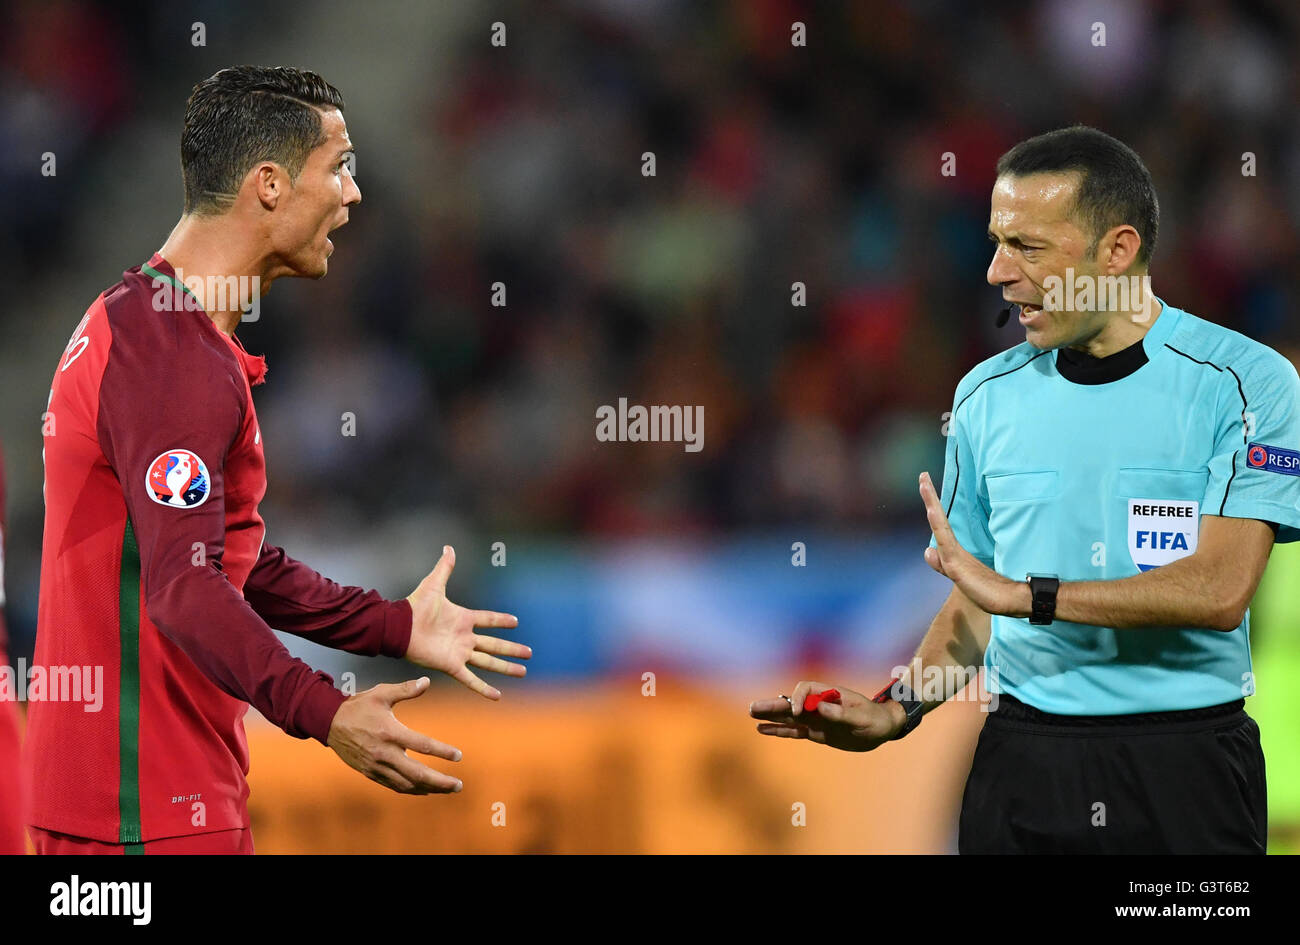 Saint-Etienne, France. 14th June, 2016. Cristiano Ronaldo (L) of Portugal argues with Turkish referee Cüneyt Cakir during the UEFA Euro 2016 Group F soccer match Portugal vs. Iceland at Stade Geoffroy Guichard in Saint-Etienne, France, 14 June 2016. Photo: Uwe Anspach/dpa/Alamy Live News Stock Photo